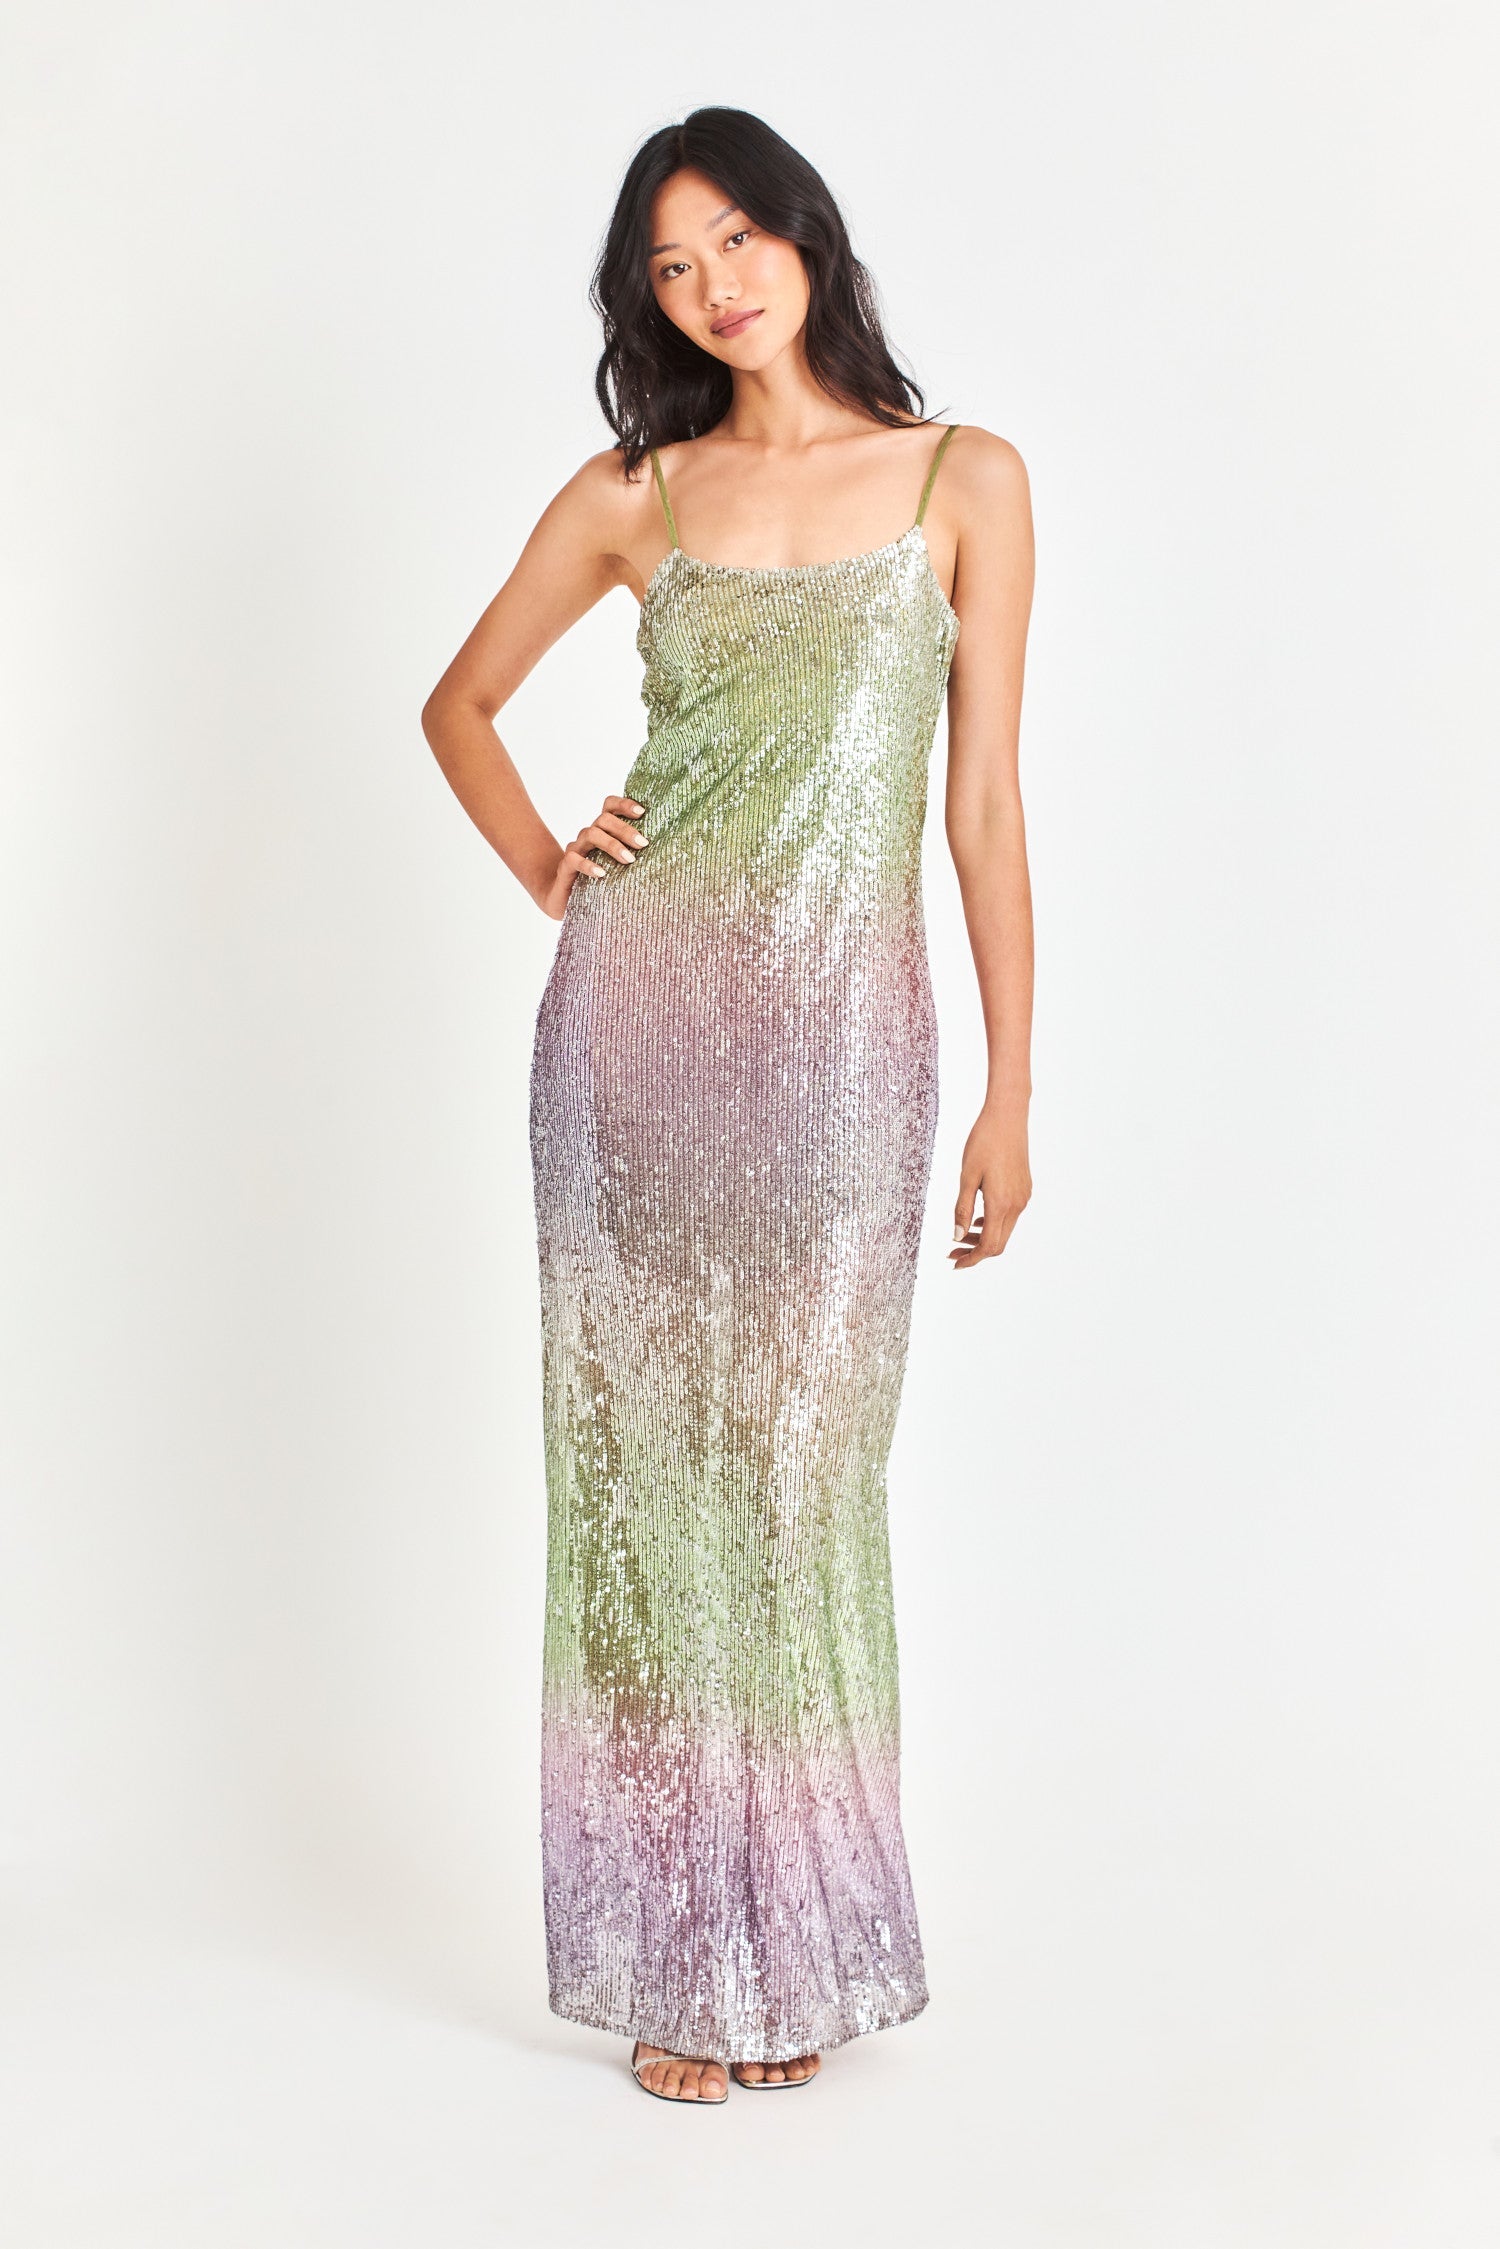 Ombre sequins dress features spaghetti straps and a slightly round neckline